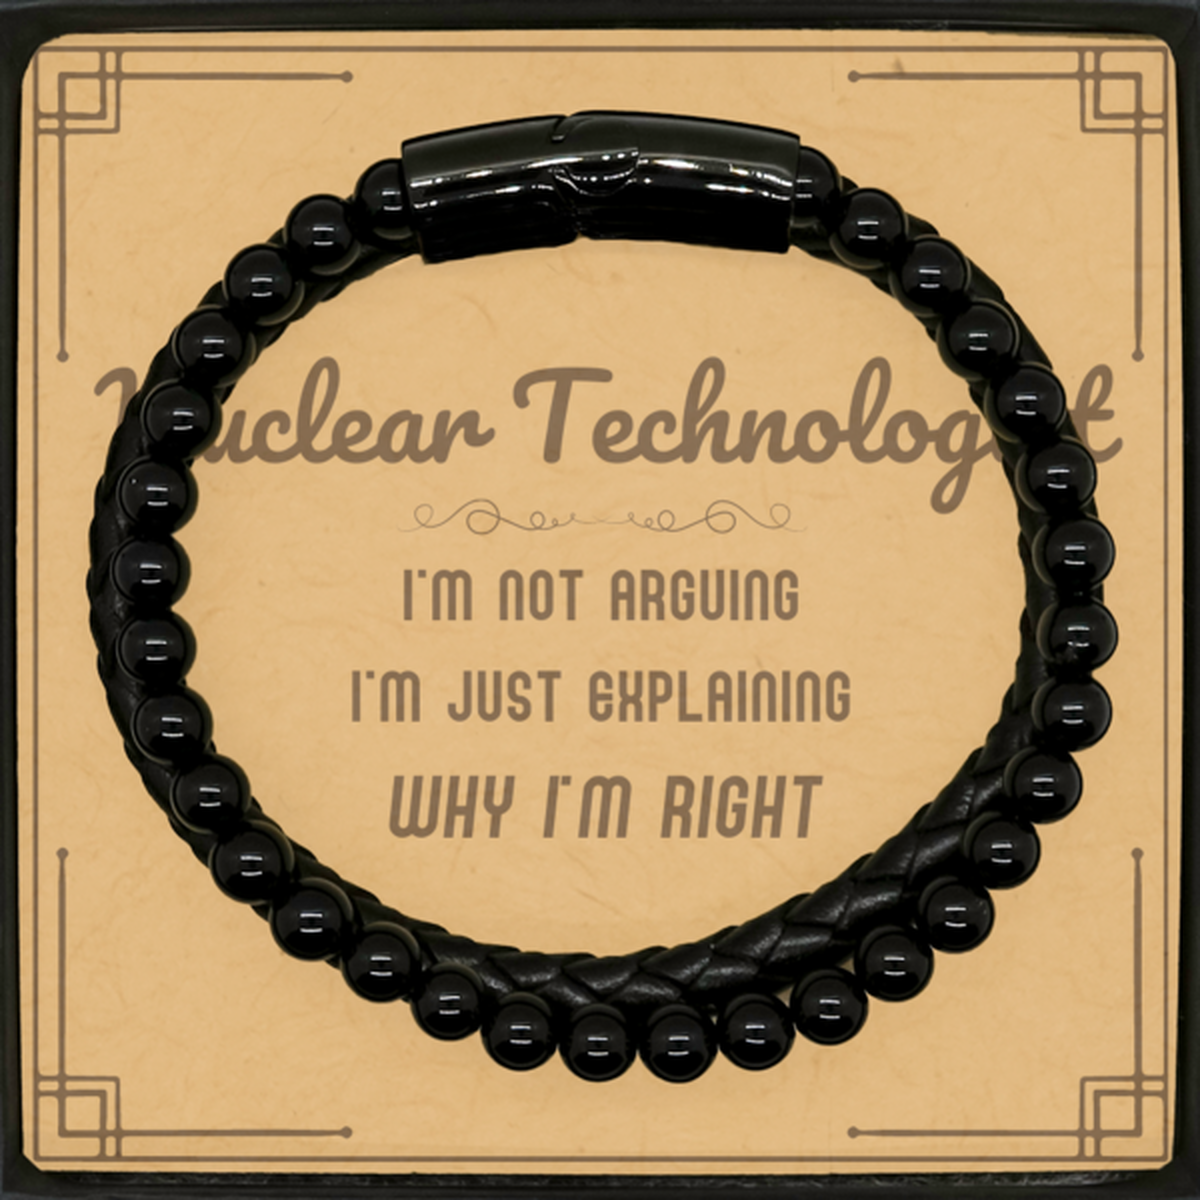 Nuclear Technologist I'm not Arguing. I'm Just Explaining Why I'm RIGHT Stone Leather Bracelets, Funny Saying Quote Nuclear Technologist Gifts For Nuclear Technologist Message Card Graduation Birthday Christmas Gifts for Men Women Coworker